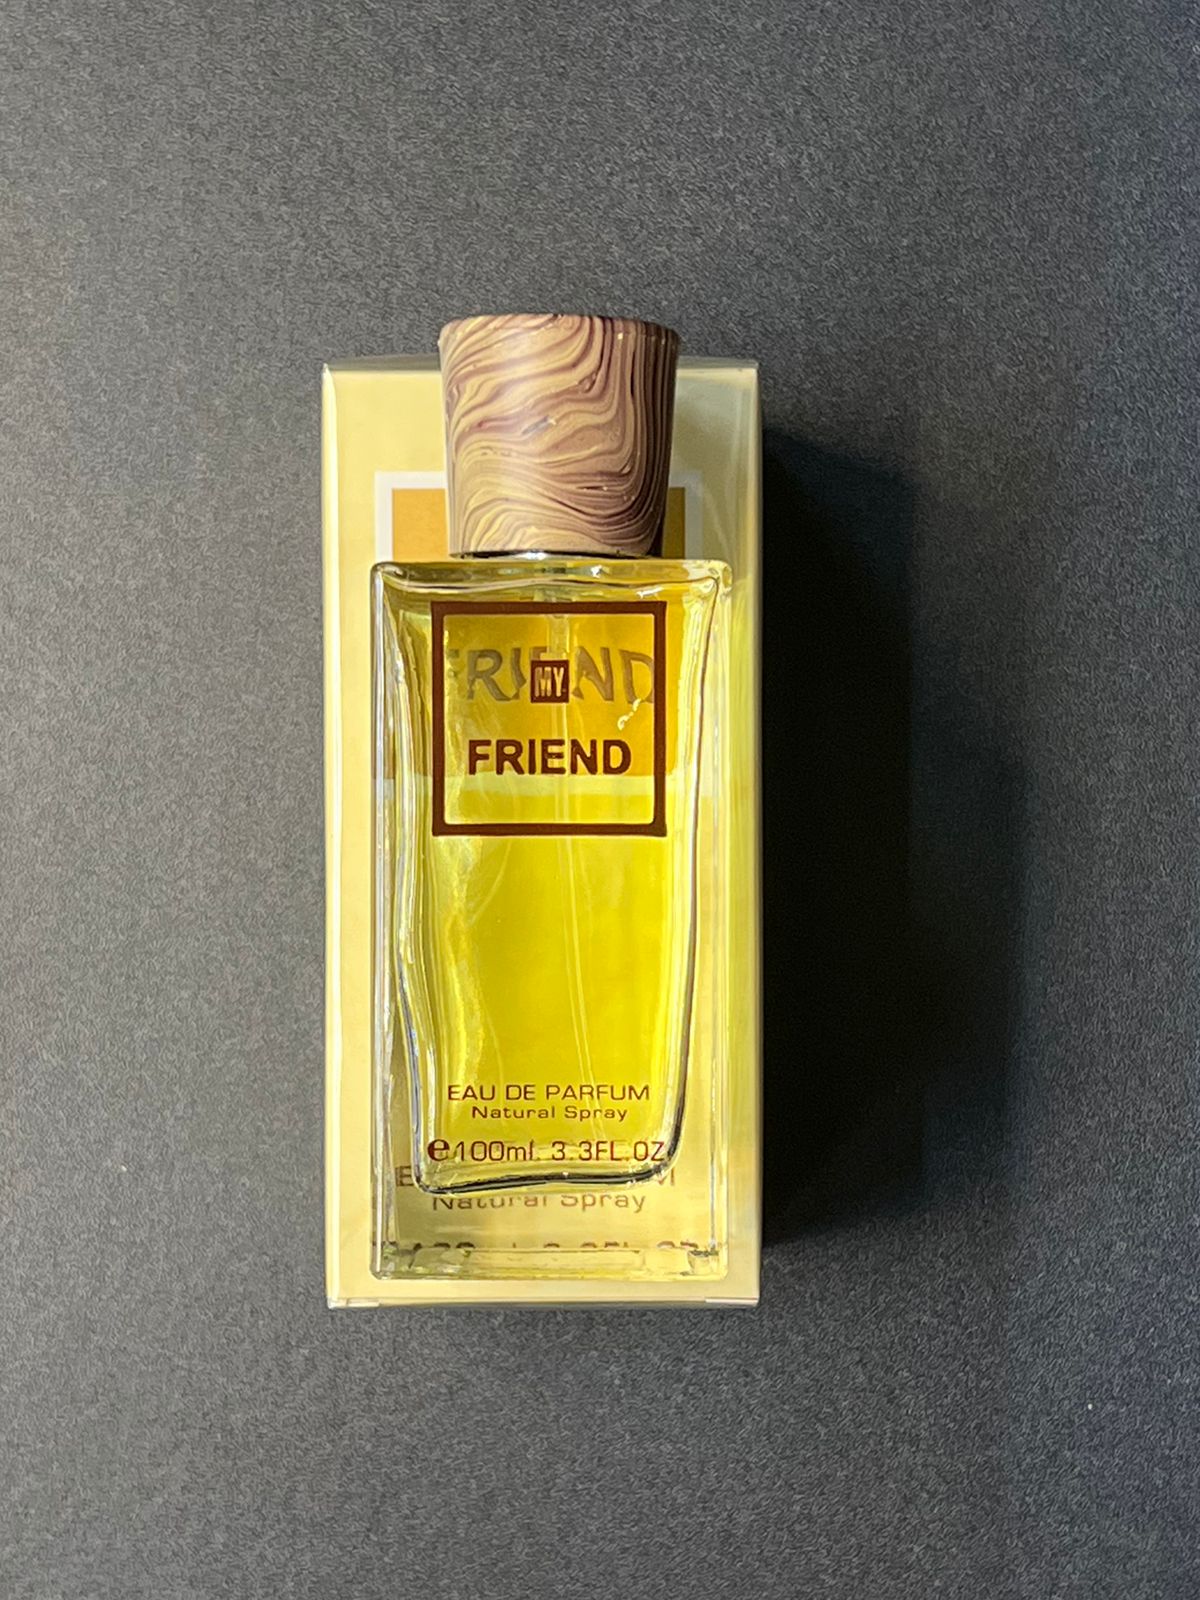 Why is Amaffi perfume so expensive?